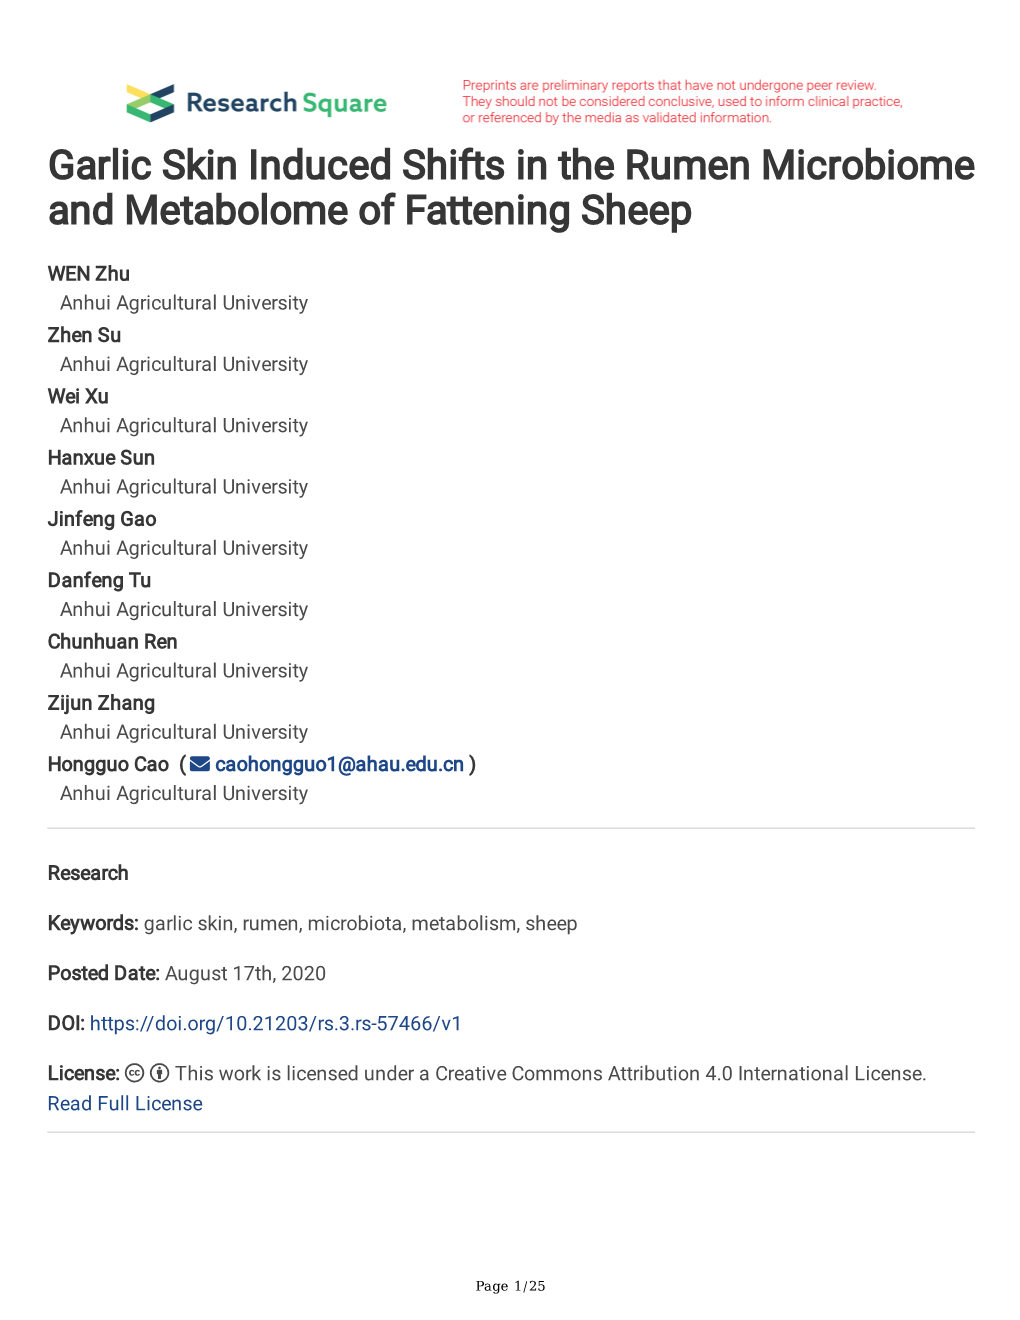 Garlic Skin Induced Shifts in the Rumen Microbiome and Metabolome of Fattening Sheep